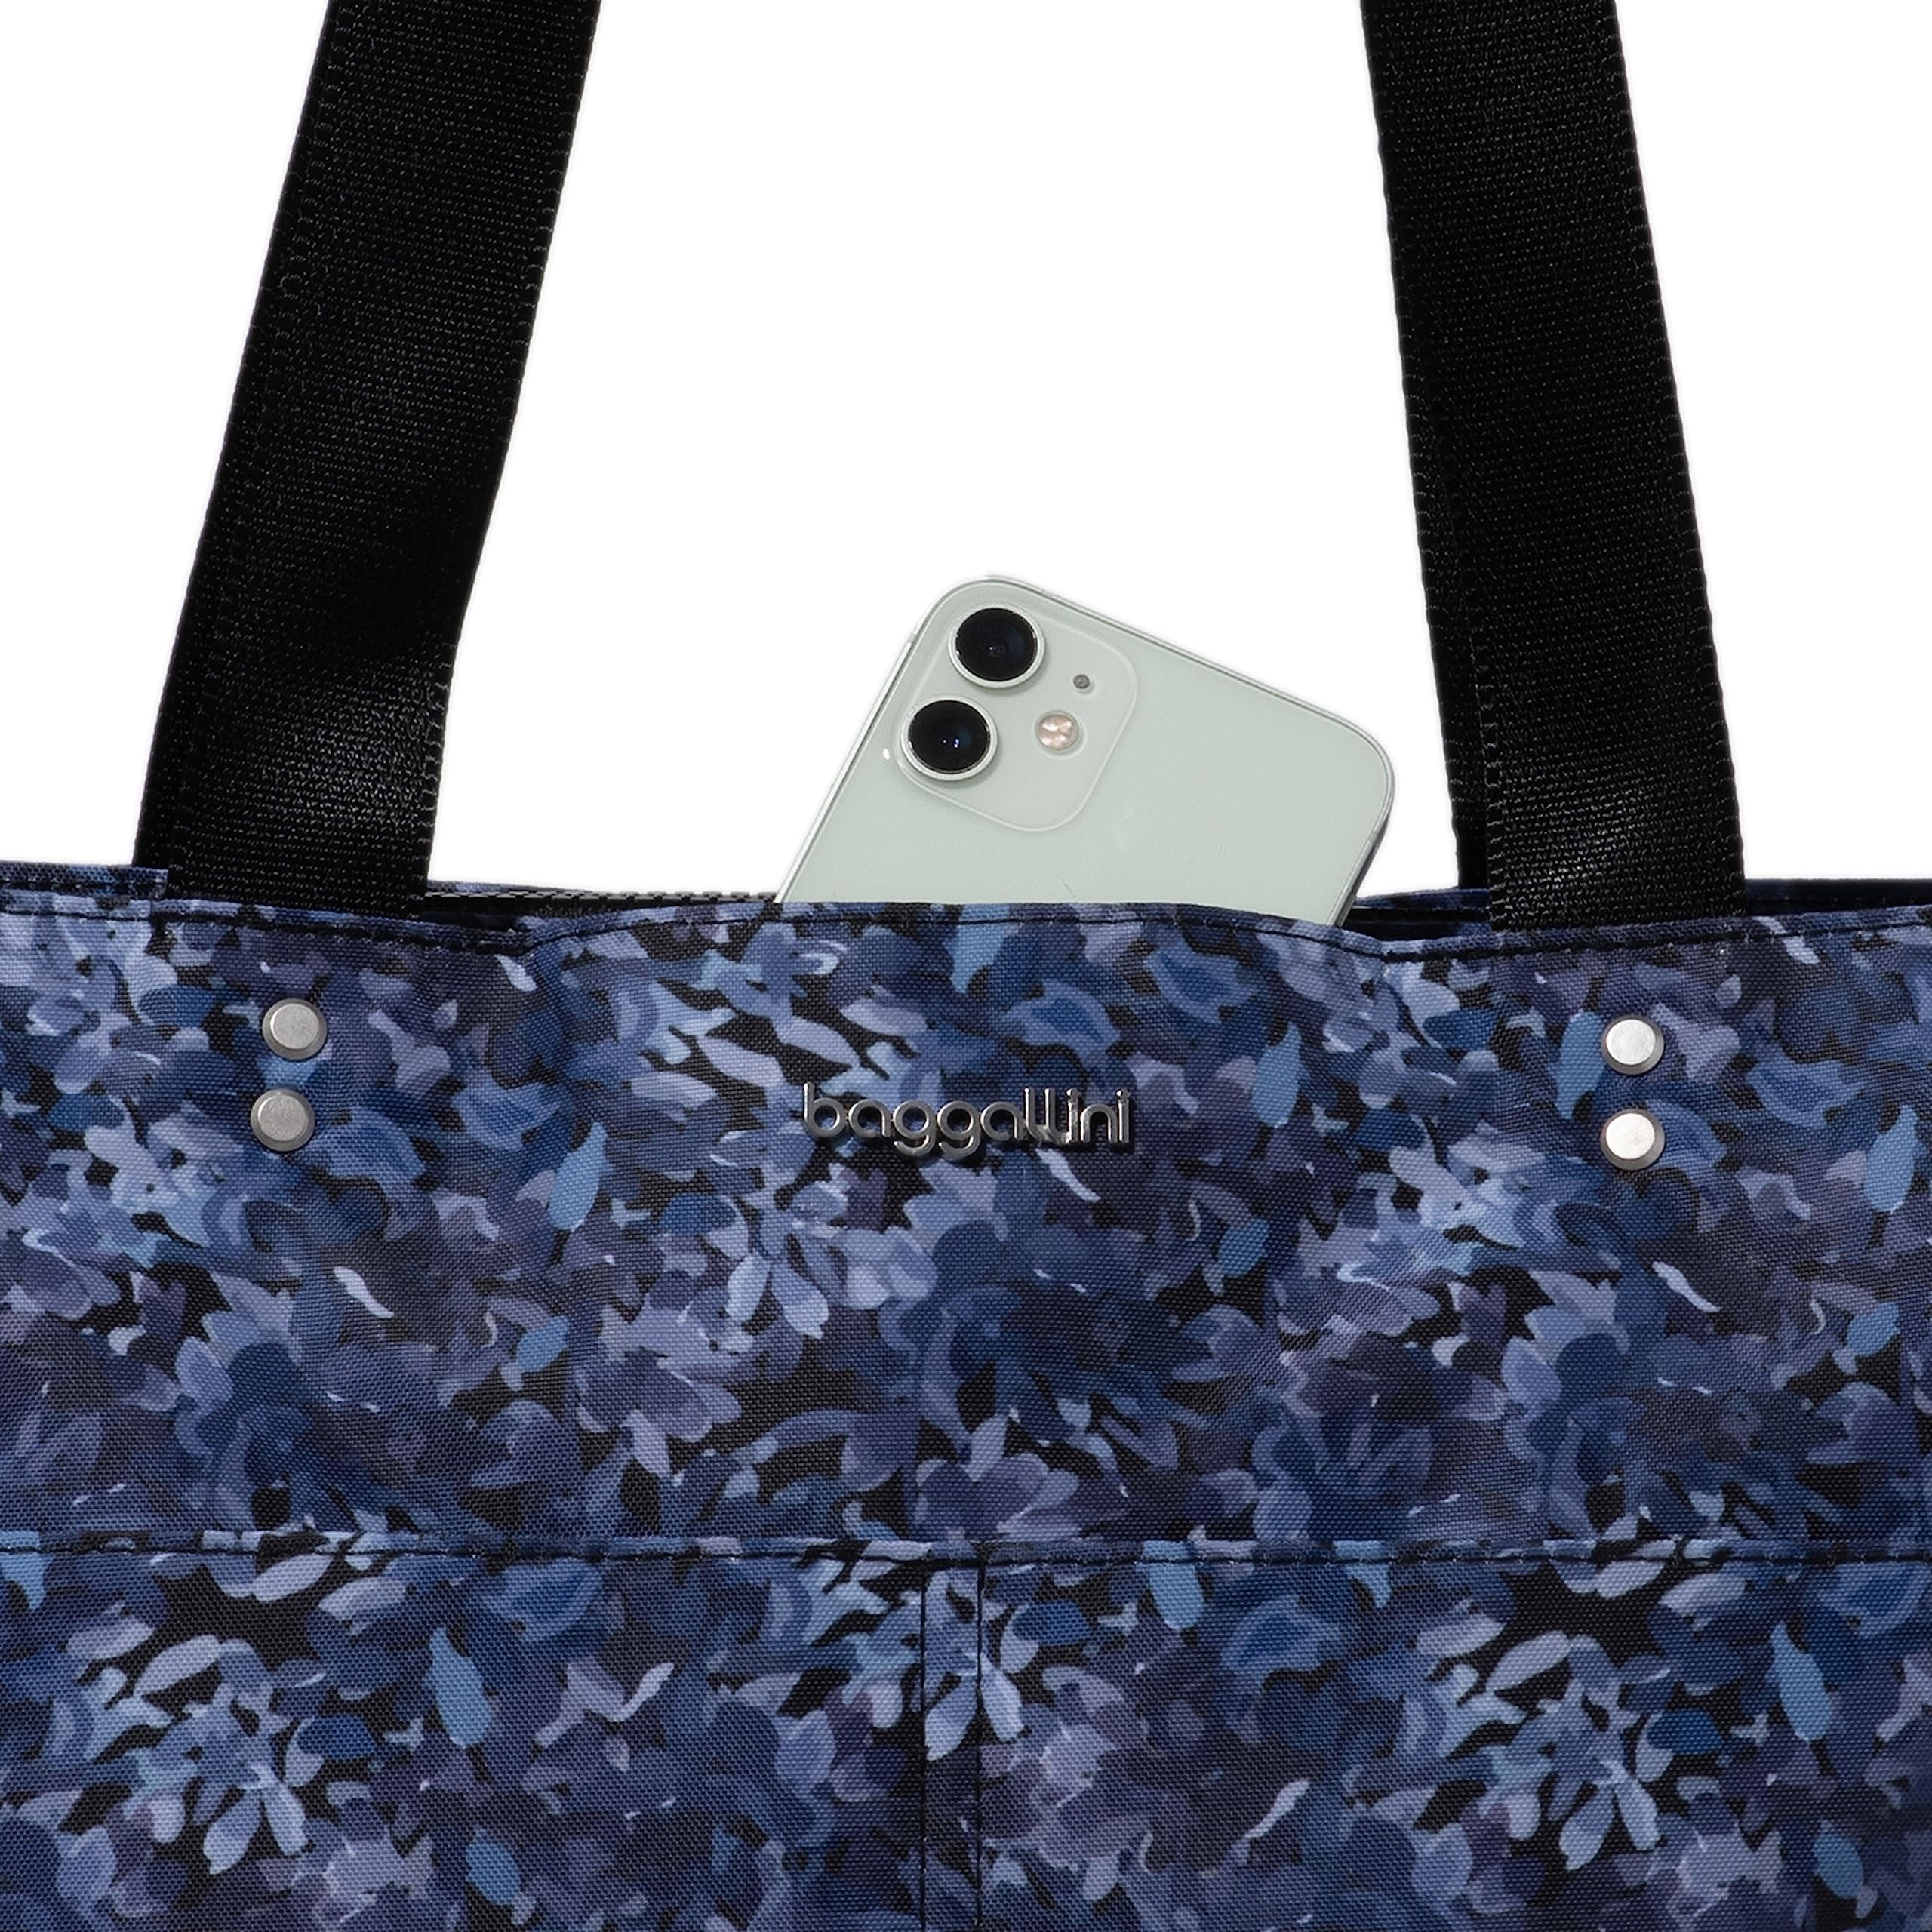 Baggallini Carryall Daily Tote